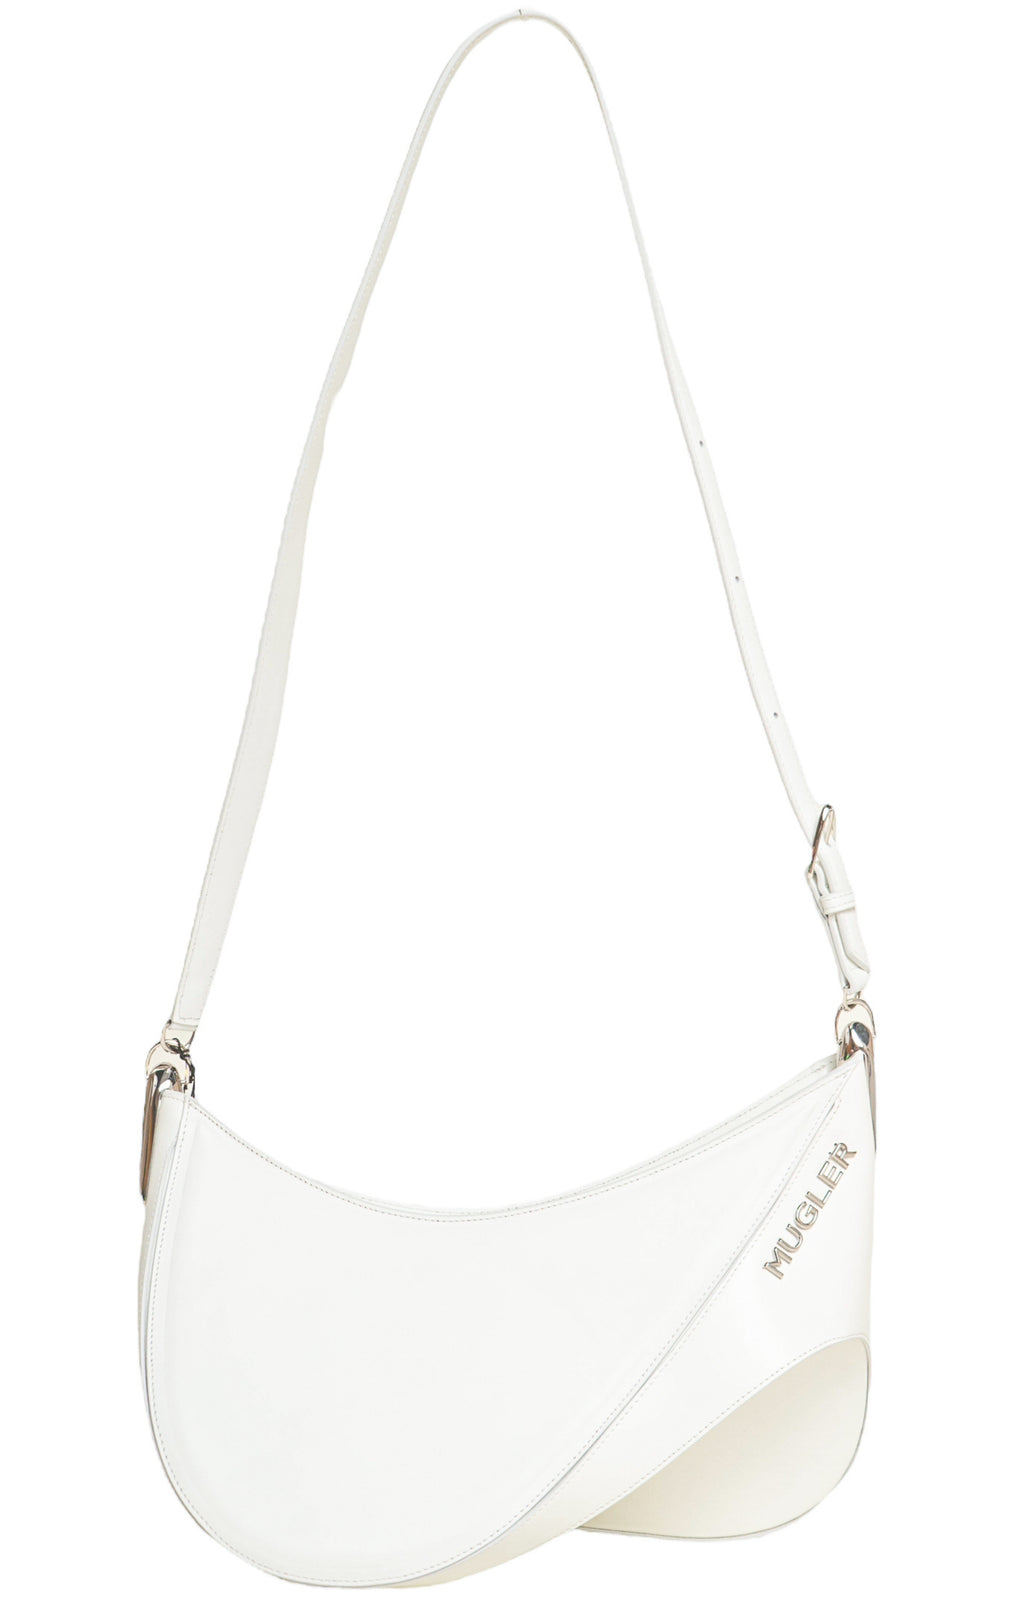 MUGLER (NEW) with tags Bag Size: 14" x 7.25" x 11"; 21.5" strap